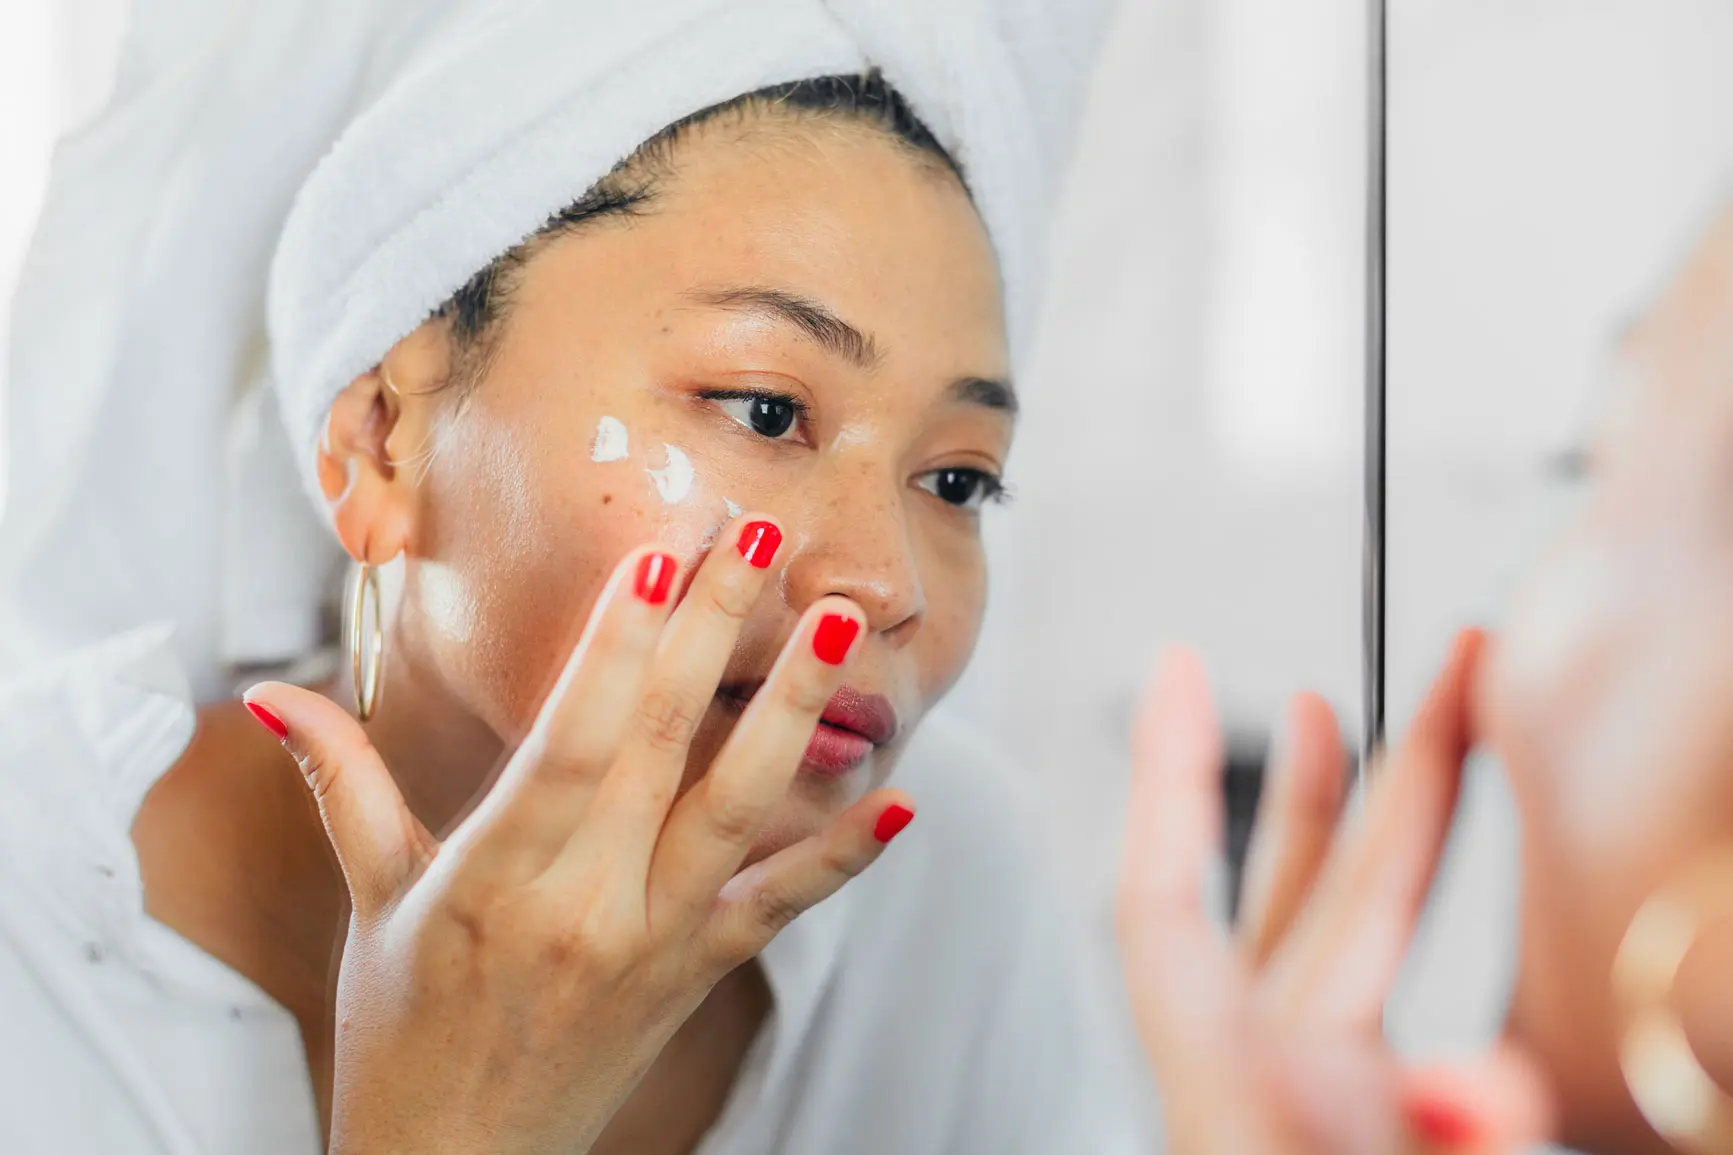 Asian woman applying dots of cream to cheek while looking in the mirror, wearing towel around her hair. AW450